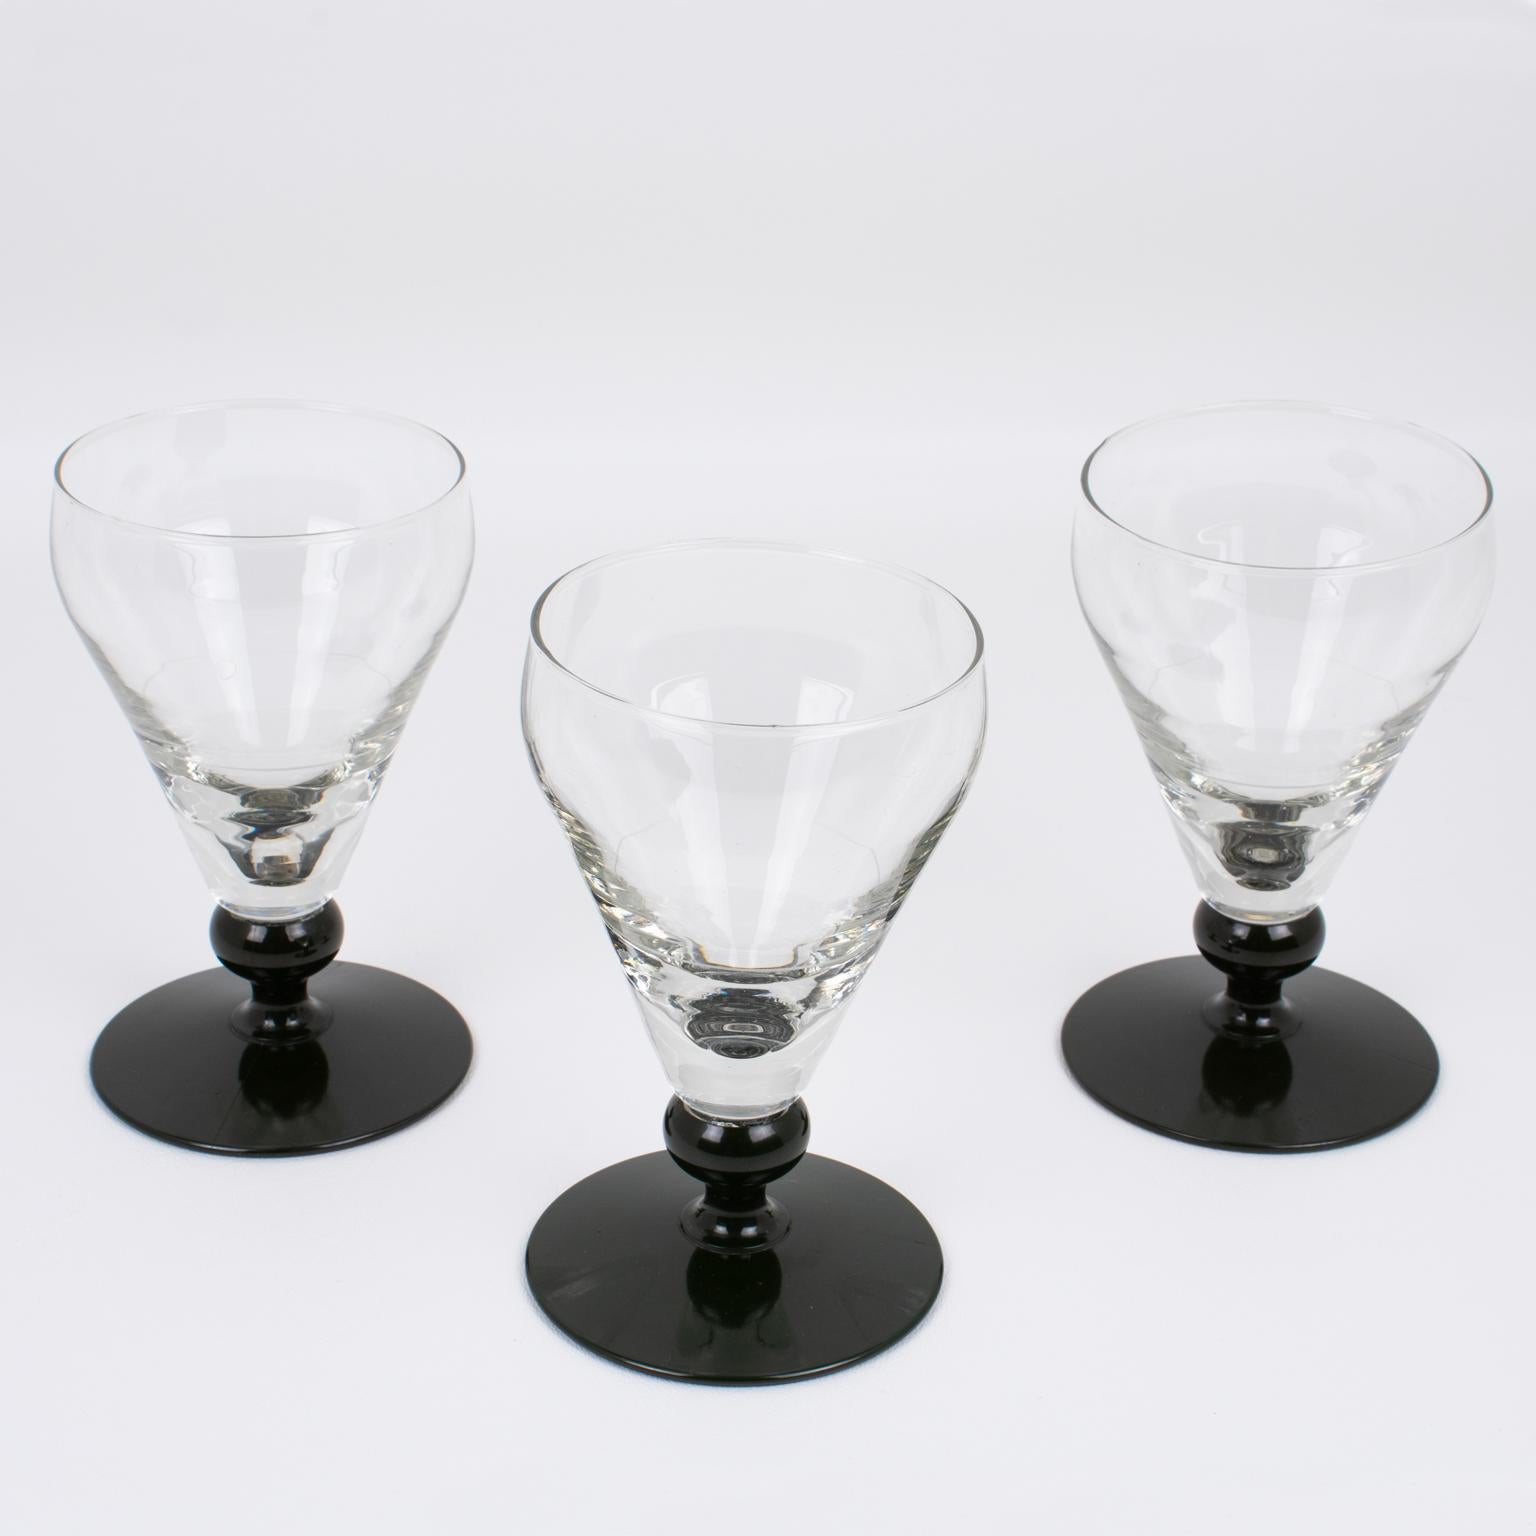 Art Nouveau French Hand-Blown Glass and Bakelite Absinthe Glasses Set, 3 pieces, 1910s For Sale